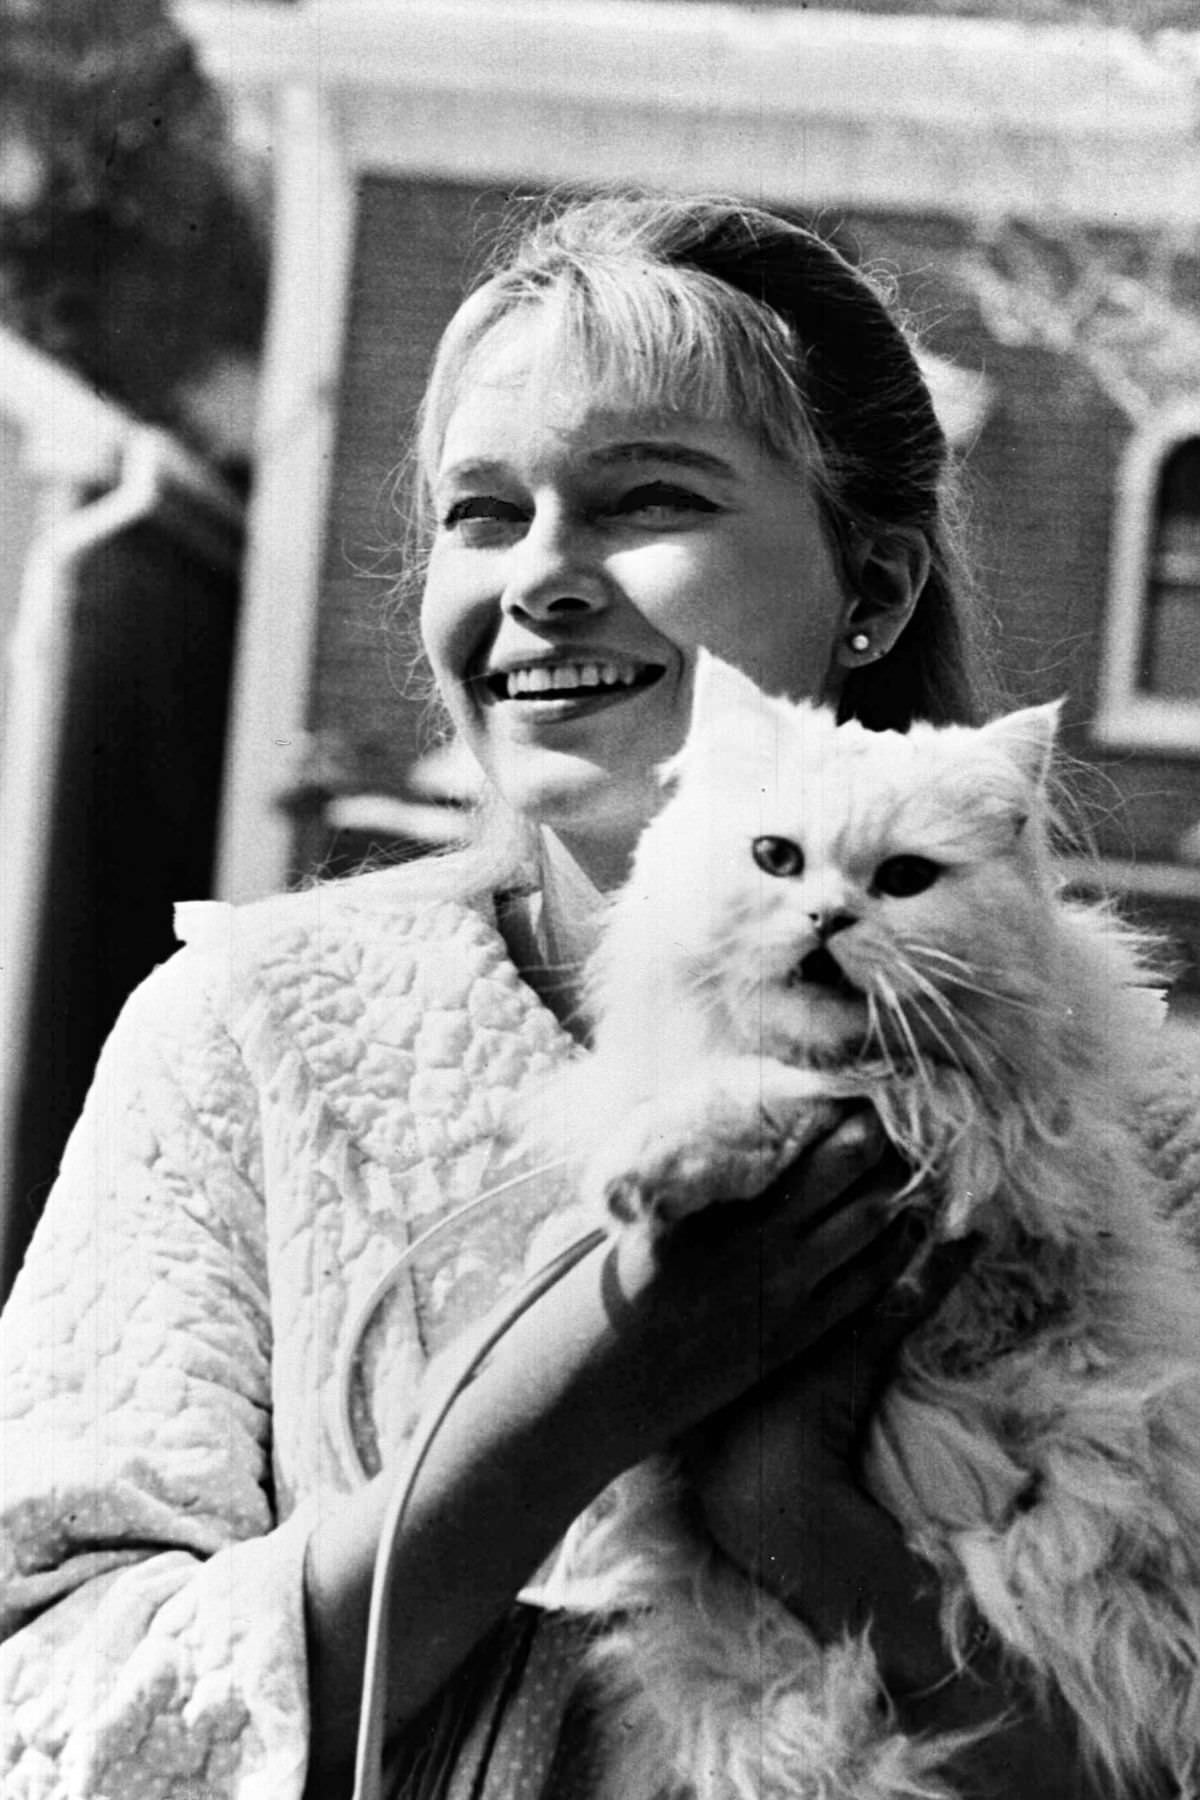 Mia Farrow was photographed with her cat companion Ref. September 12, 1965